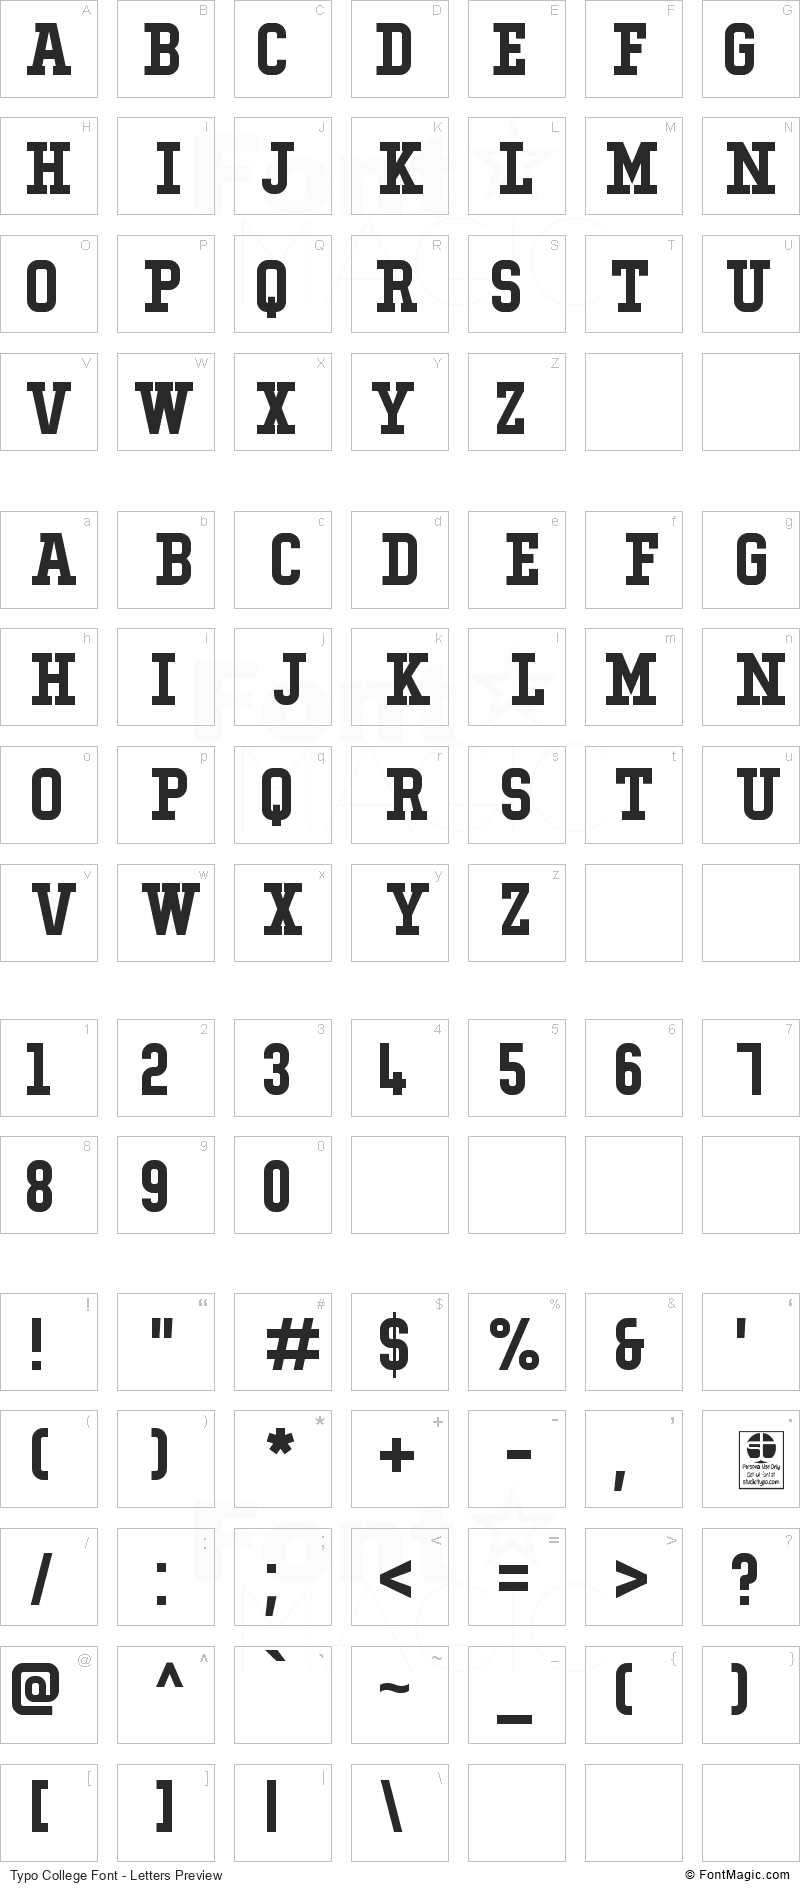 Typo College Font - All Latters Preview Chart